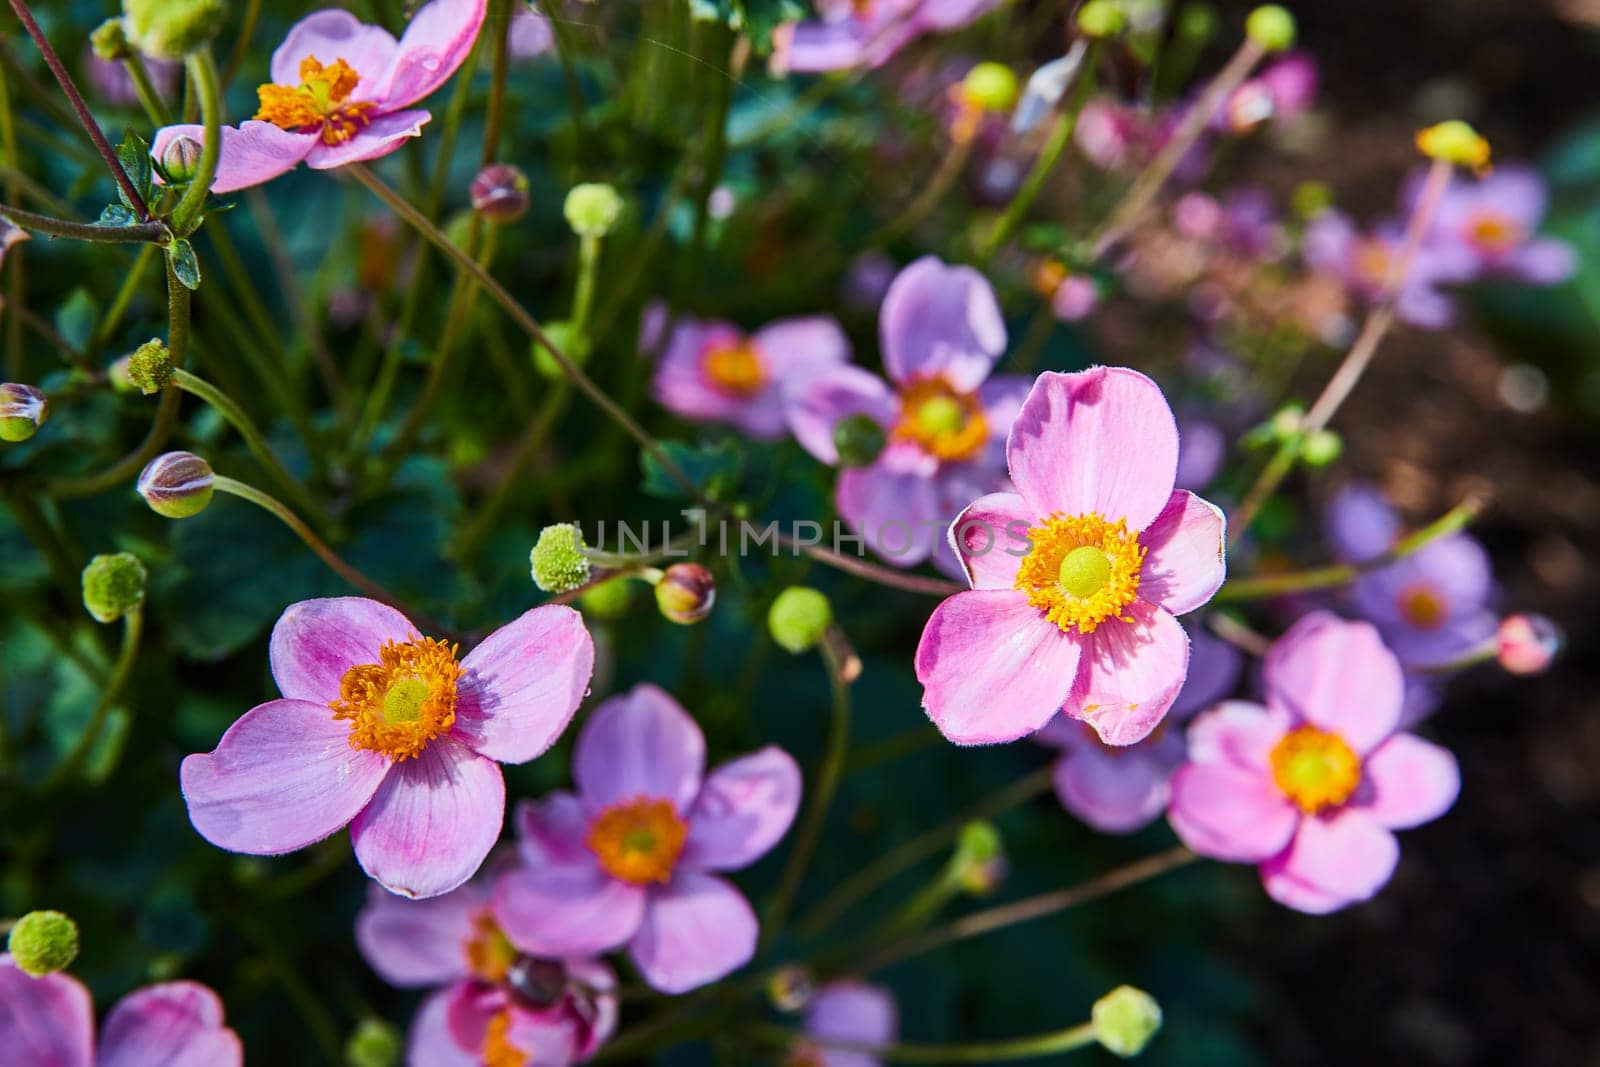 Vibrant close-up of Japanese anemone flowers in full bloom, bathed in soft daylight at the Botanic Gardens in Elkhart, Indiana, 2023